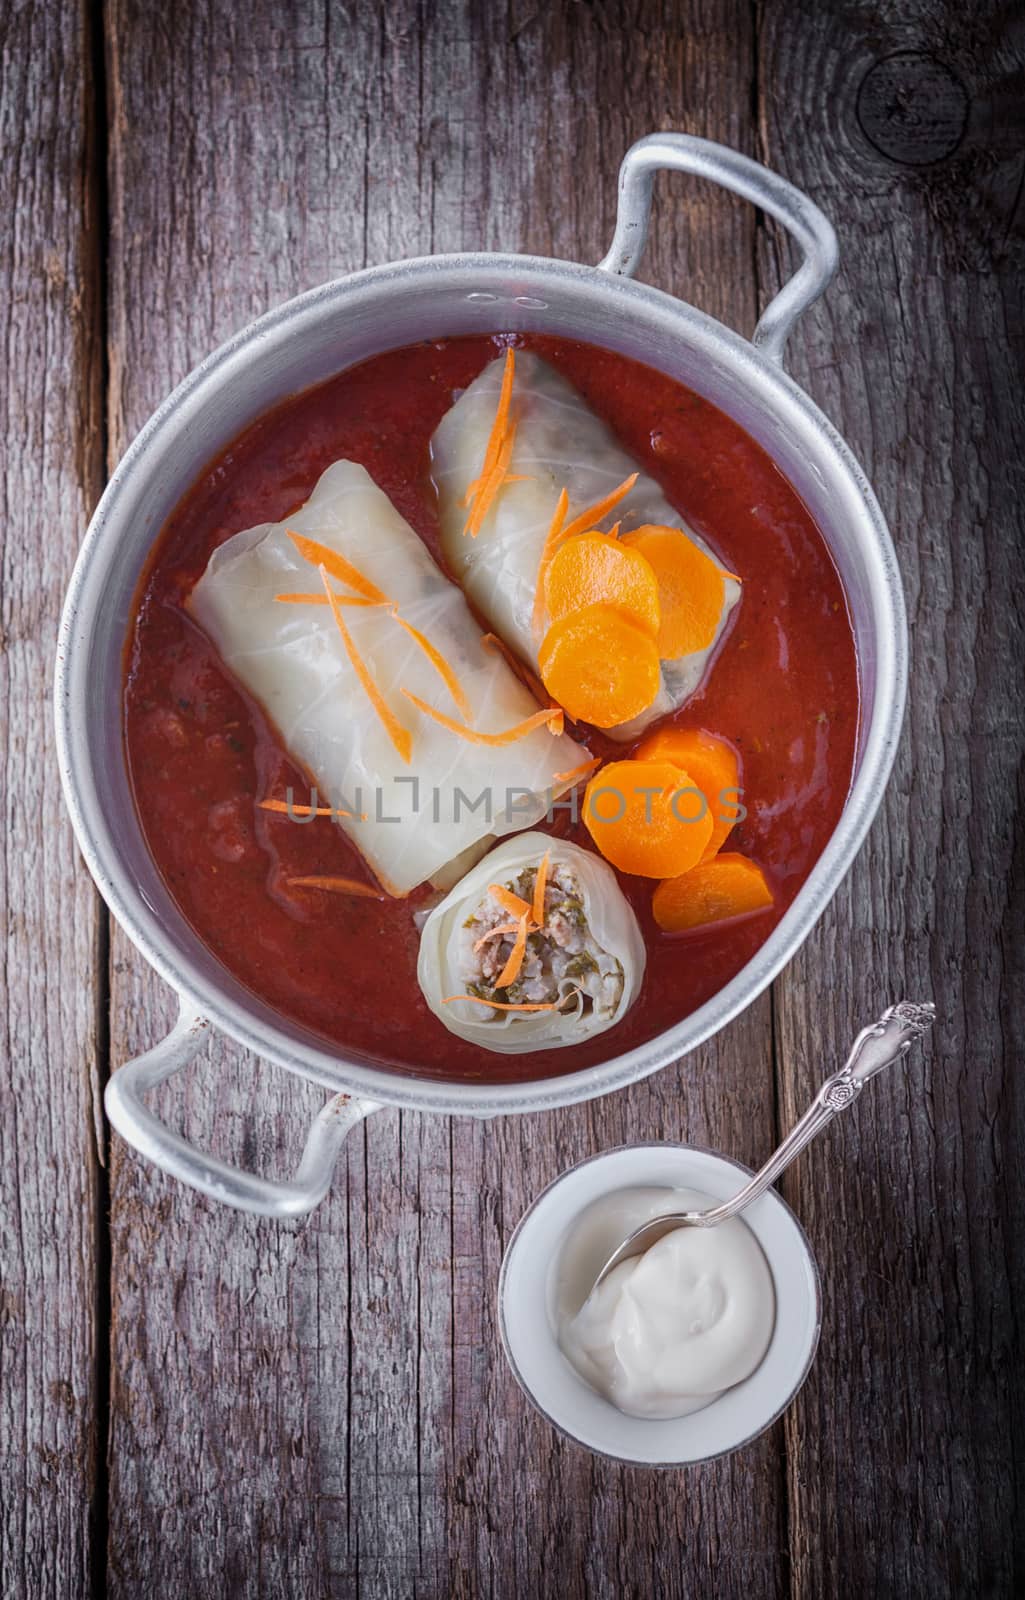 Stuffed Cabbage Rolls by supercat67